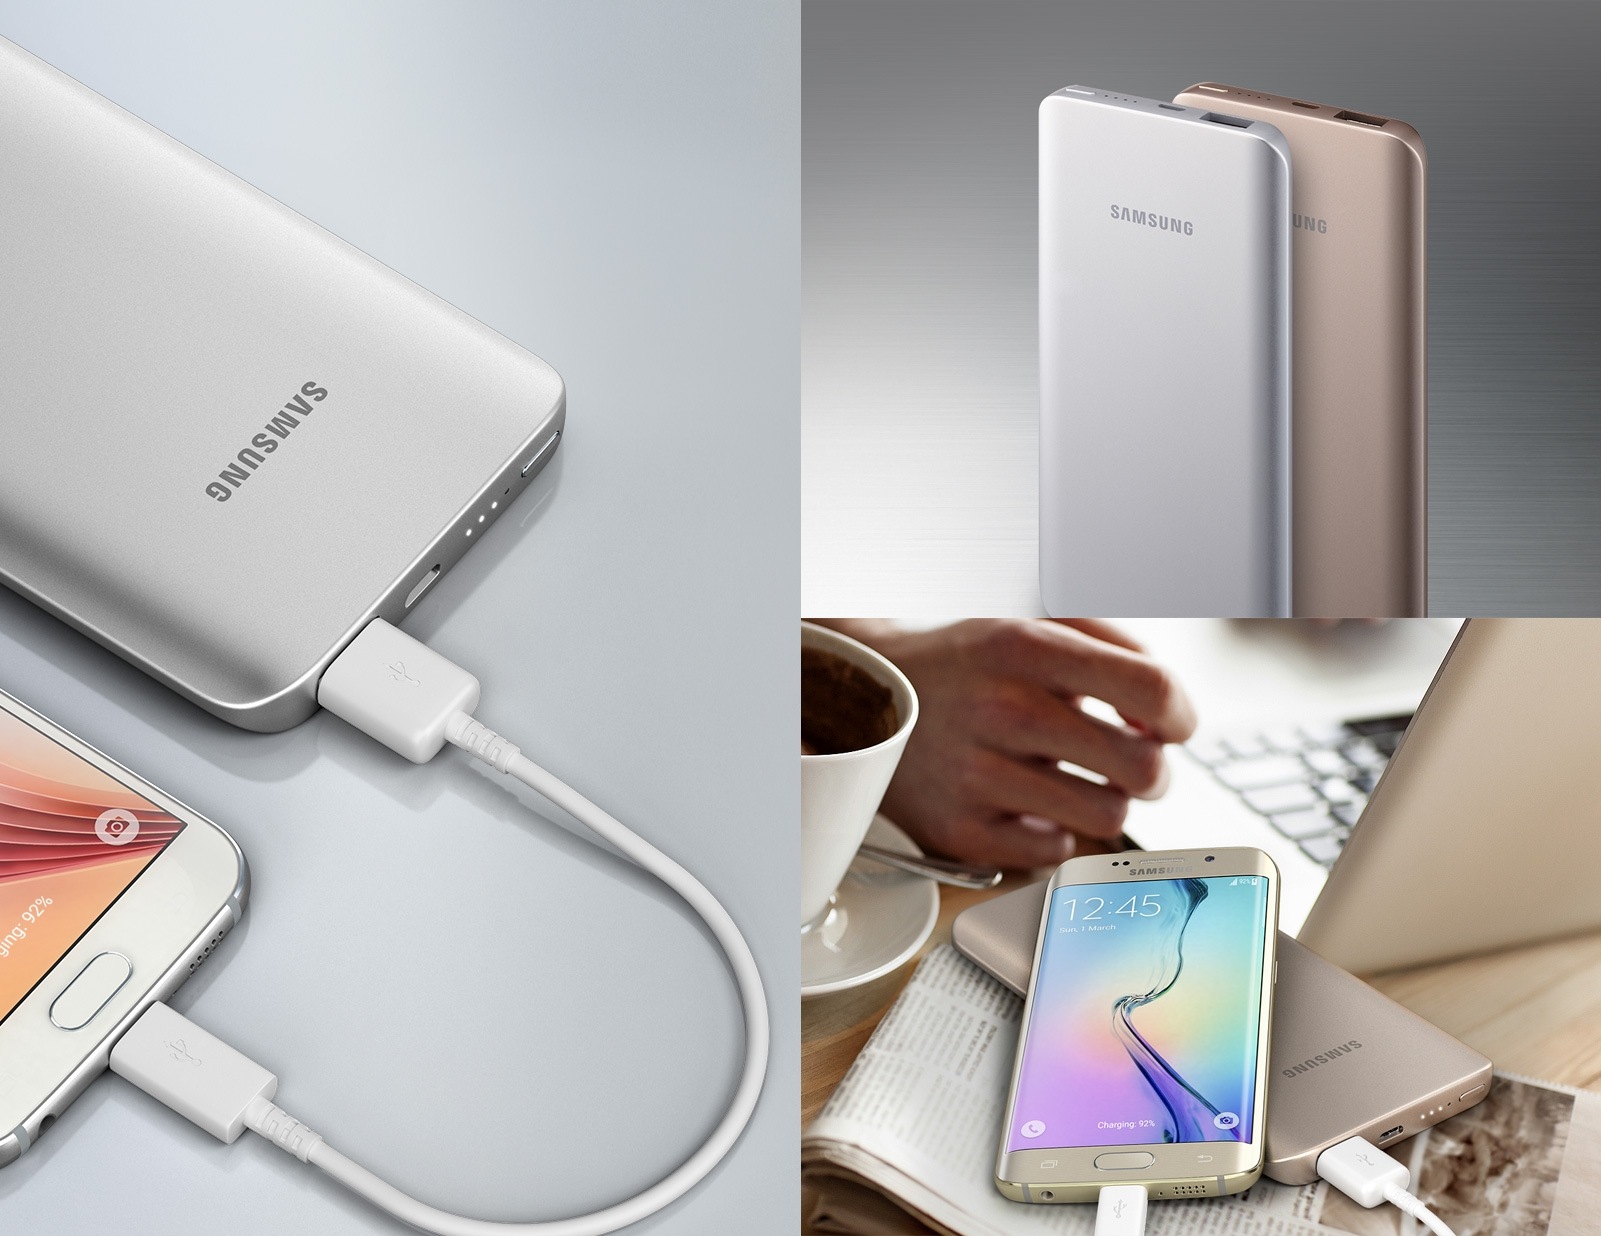 Images of Galaxy S6 and S6 edge accessories